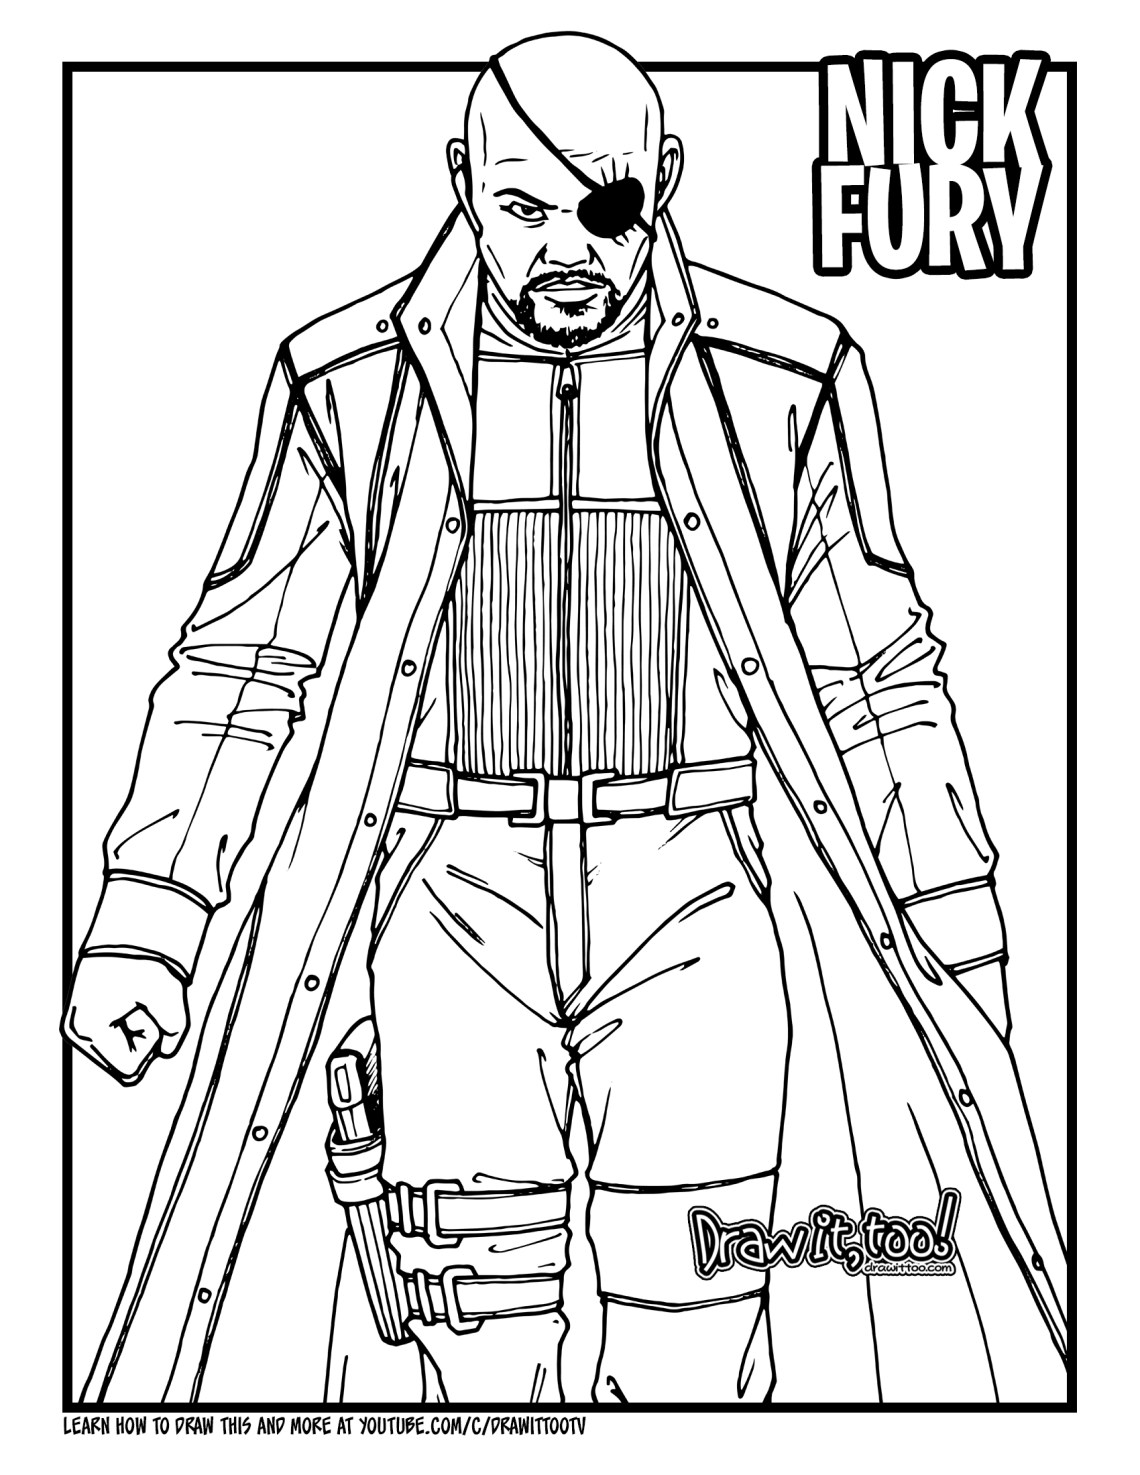 NICK FURY (Marvel Cinematic Universe) Drawing Tutorial. Draw It, Too